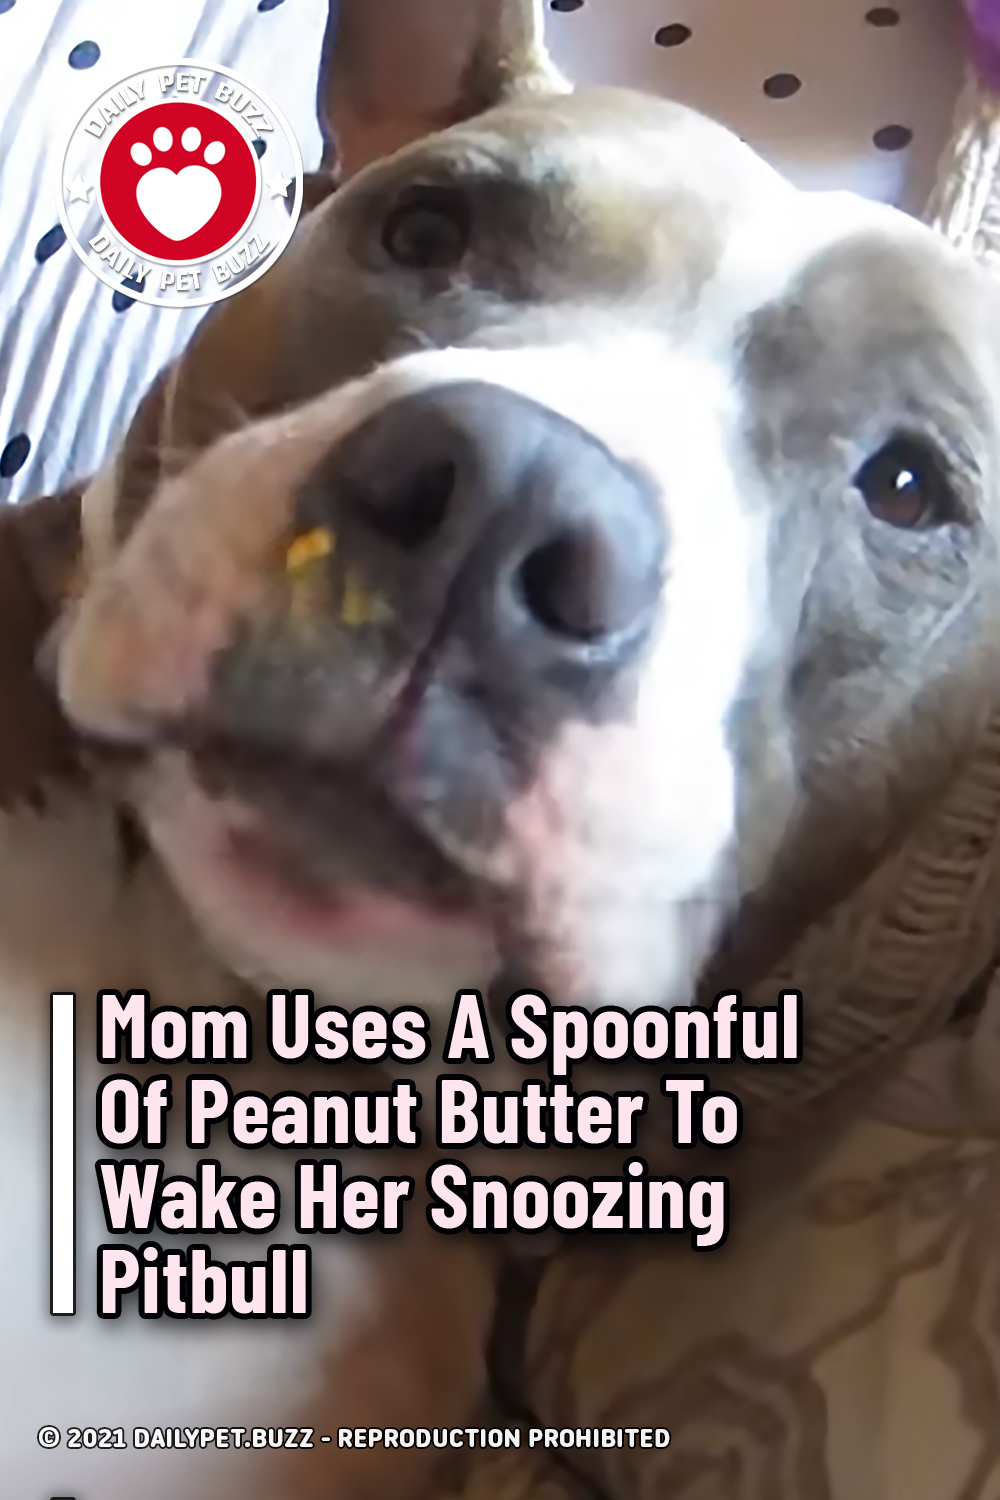 Mom Uses A Spoonful Of Peanut Butter To Wake Her Snoozing Pitbull